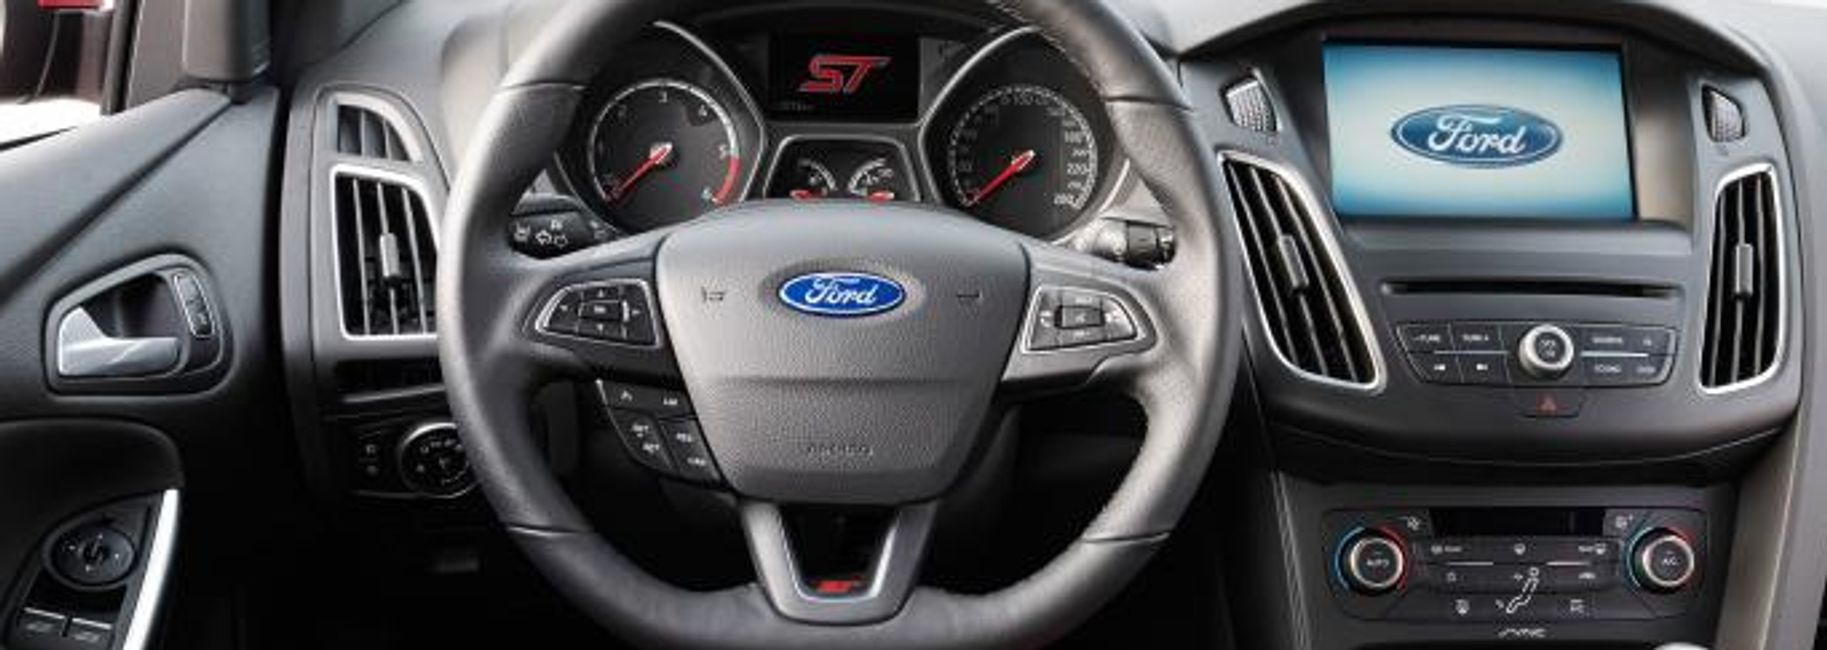 Ford Replacement Car Keys Anywhere In Ireland